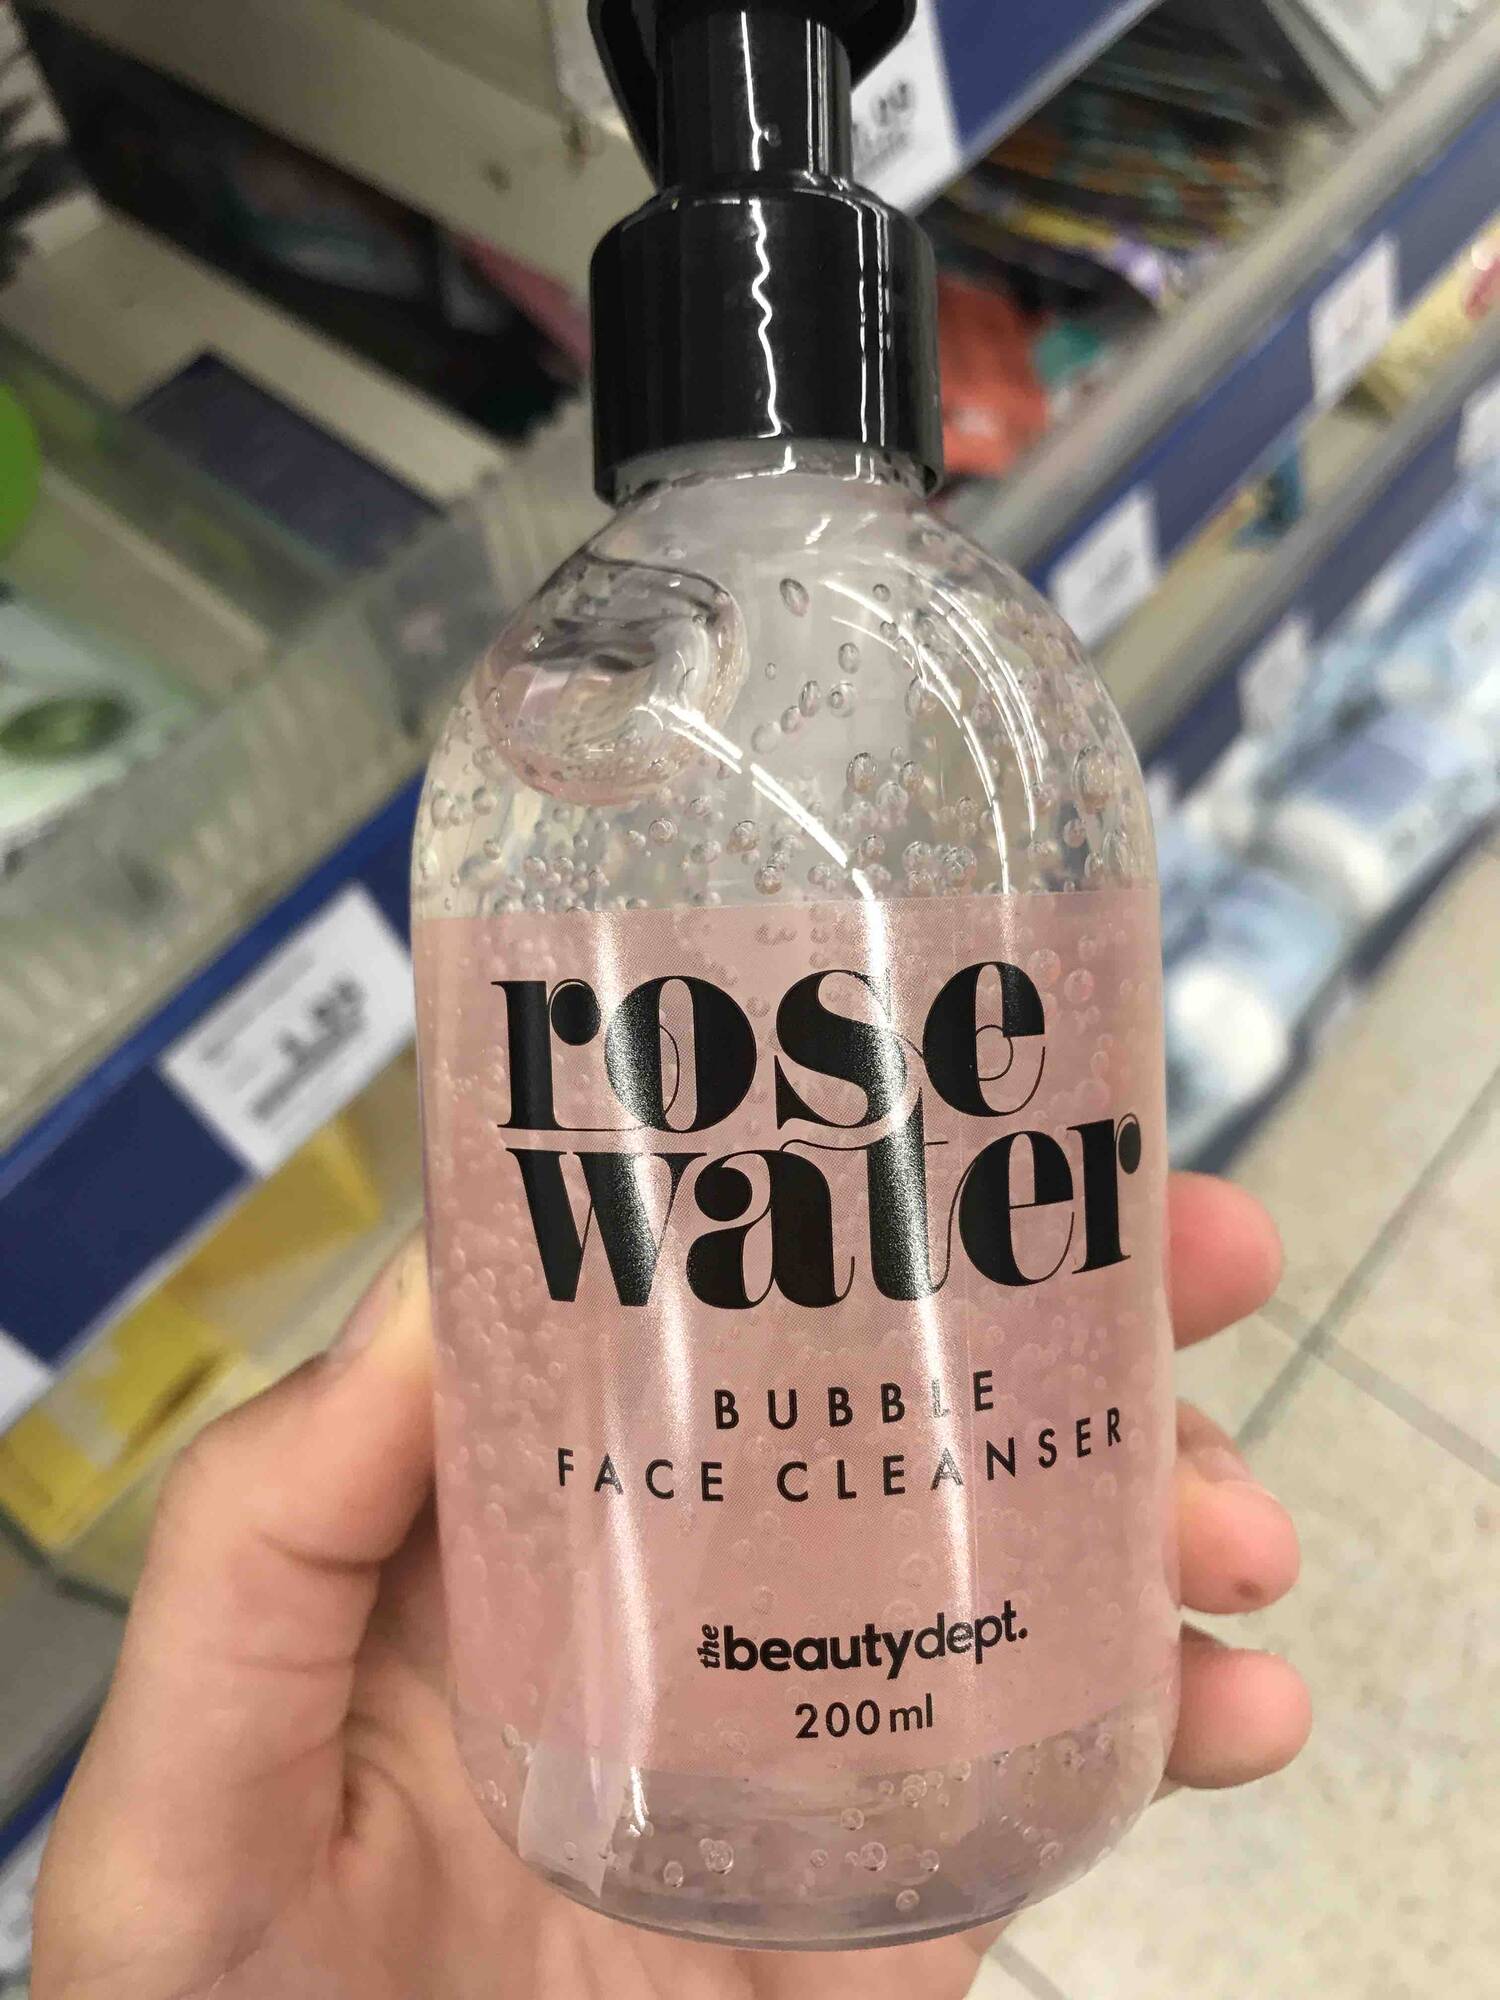 THE BEAUTY DEPT - Rose water - Bubble face cleanser